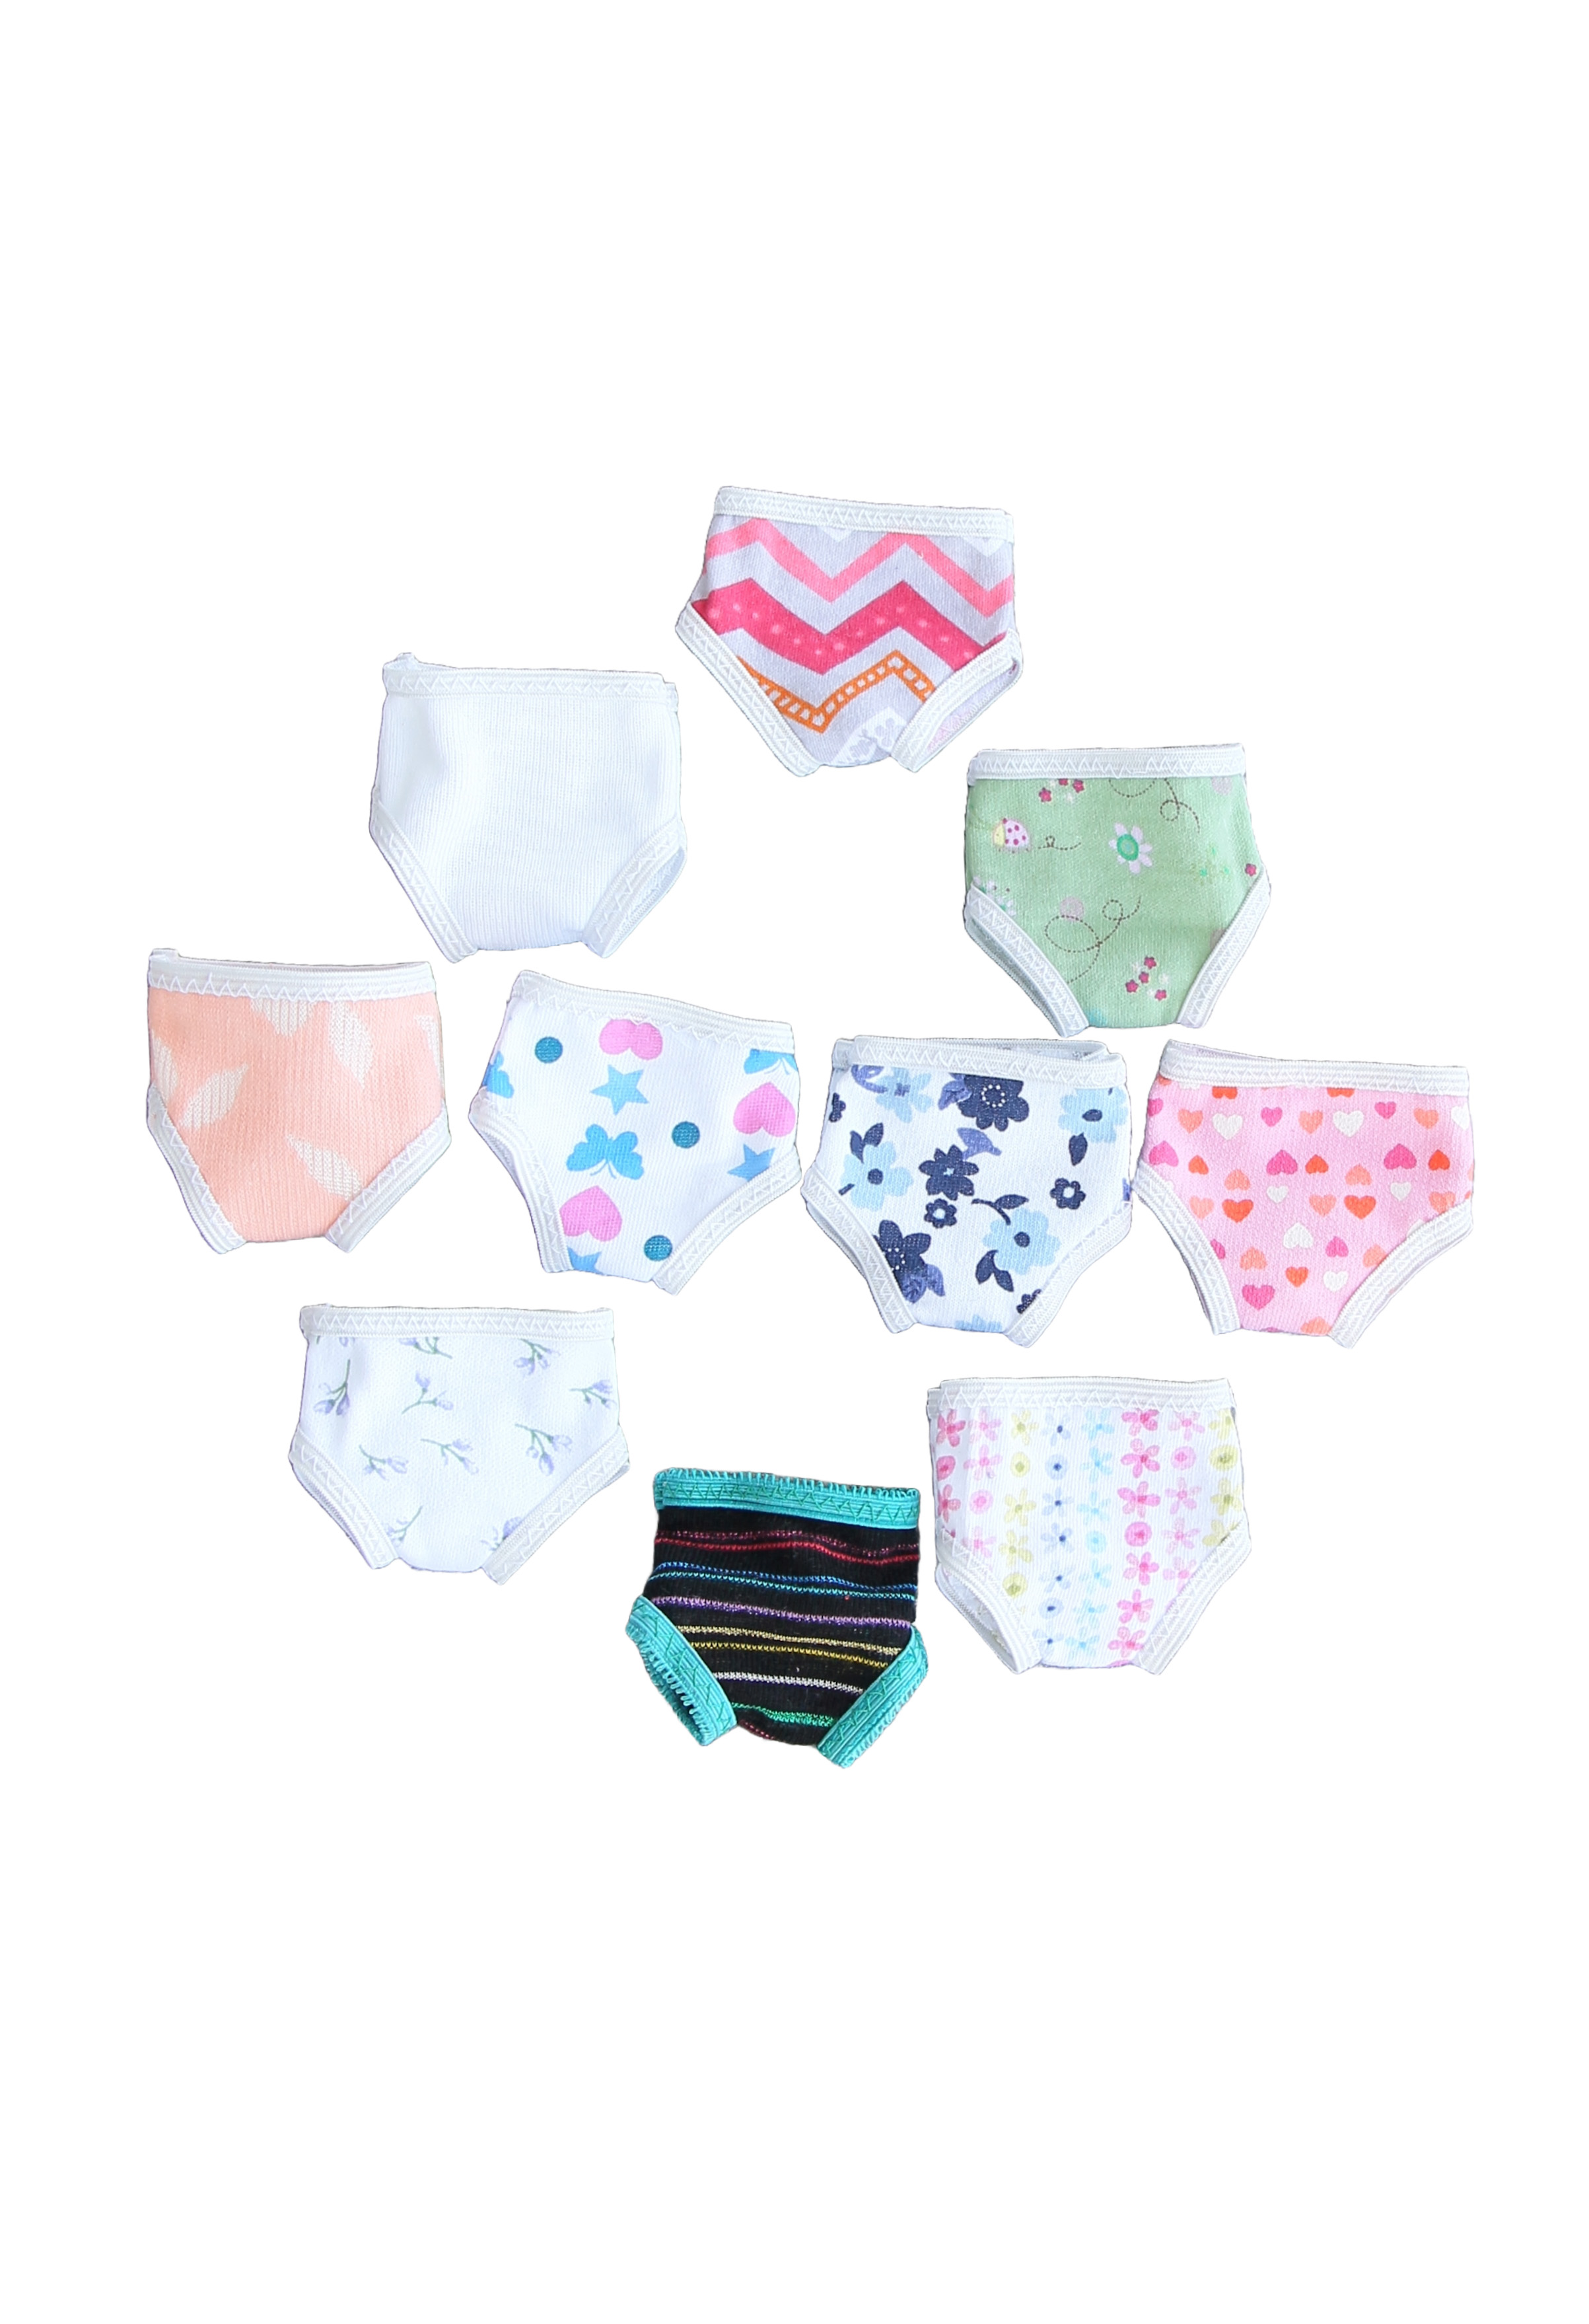 3 Pack Panties Underwear fits 14.5 American Girl Wellie Wishers Doll  Clothes